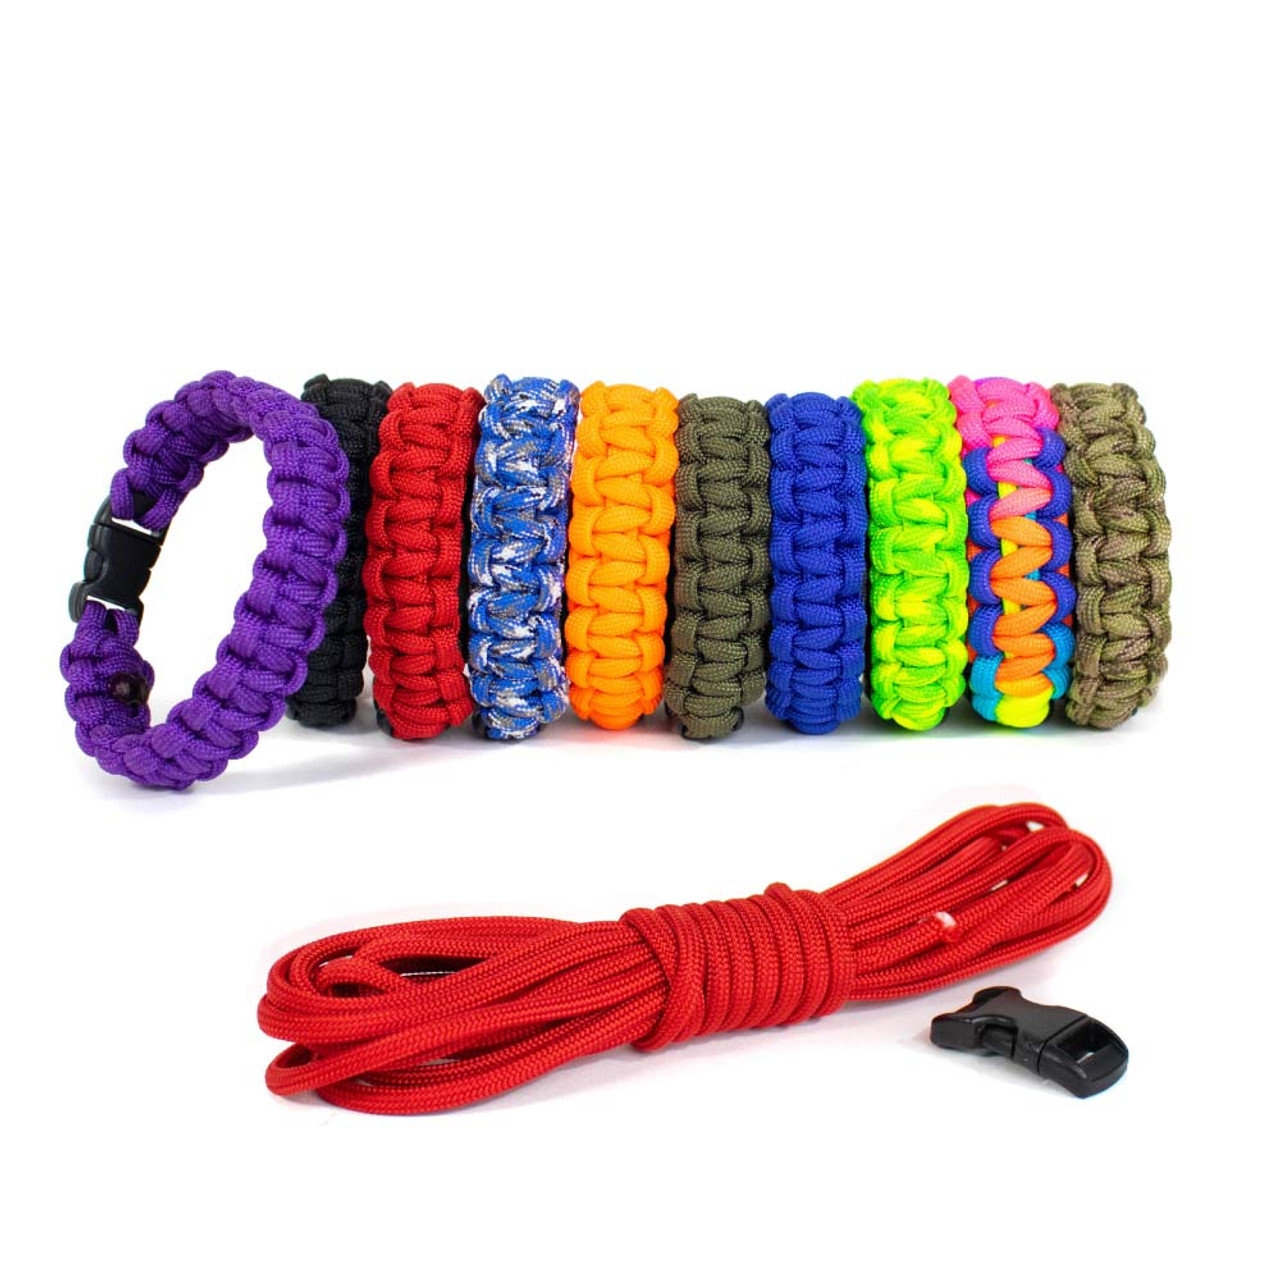 5 New Cobra Bracelet Variations to Try - Paracord Planet